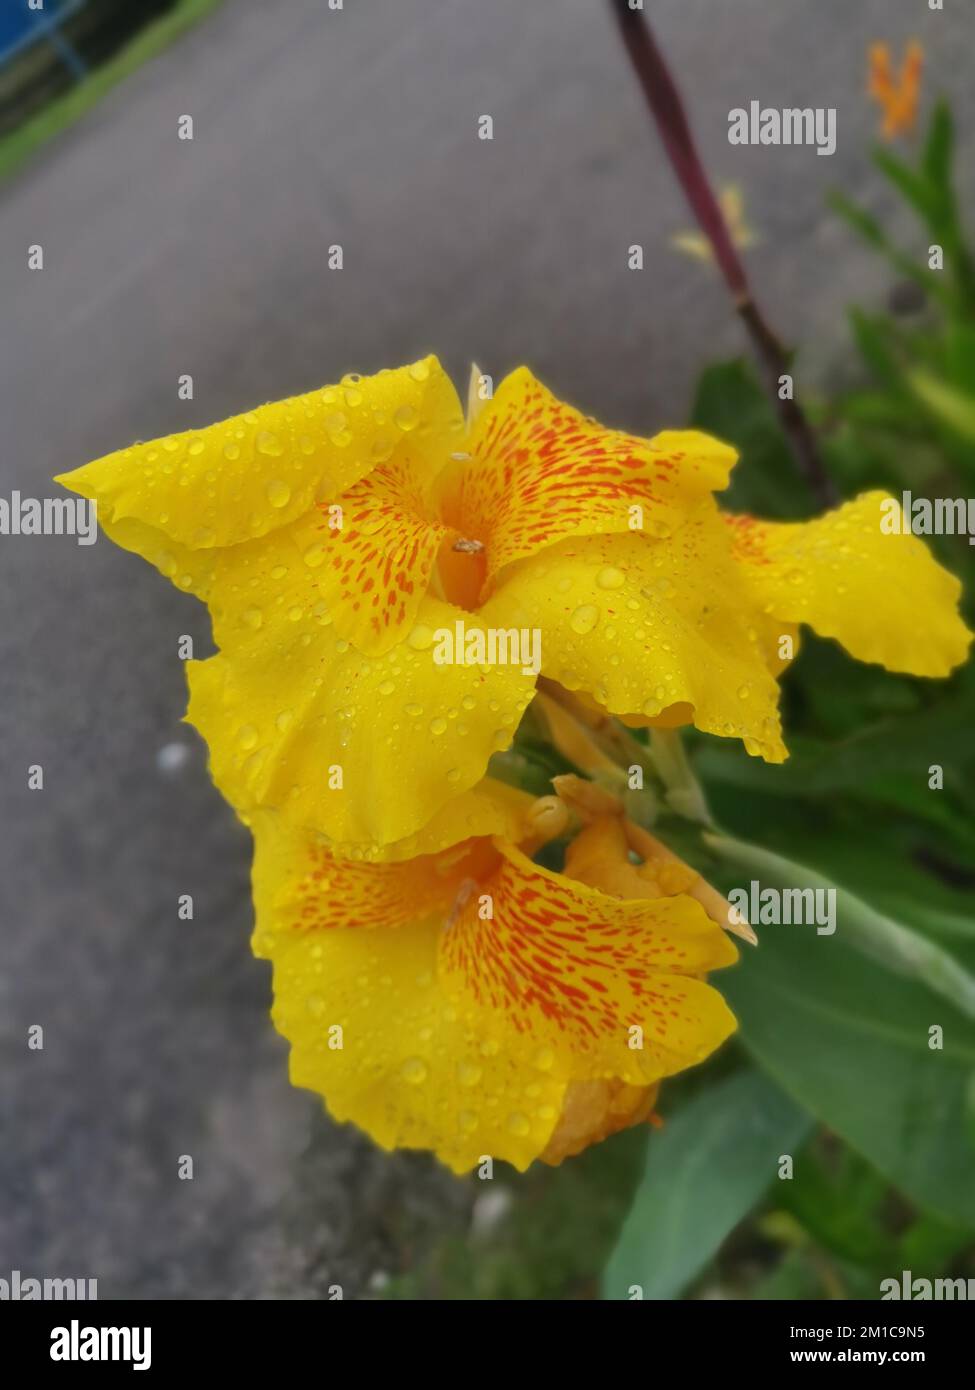 beautiful yellow-colored canna indica lily flower plant Stock Photo